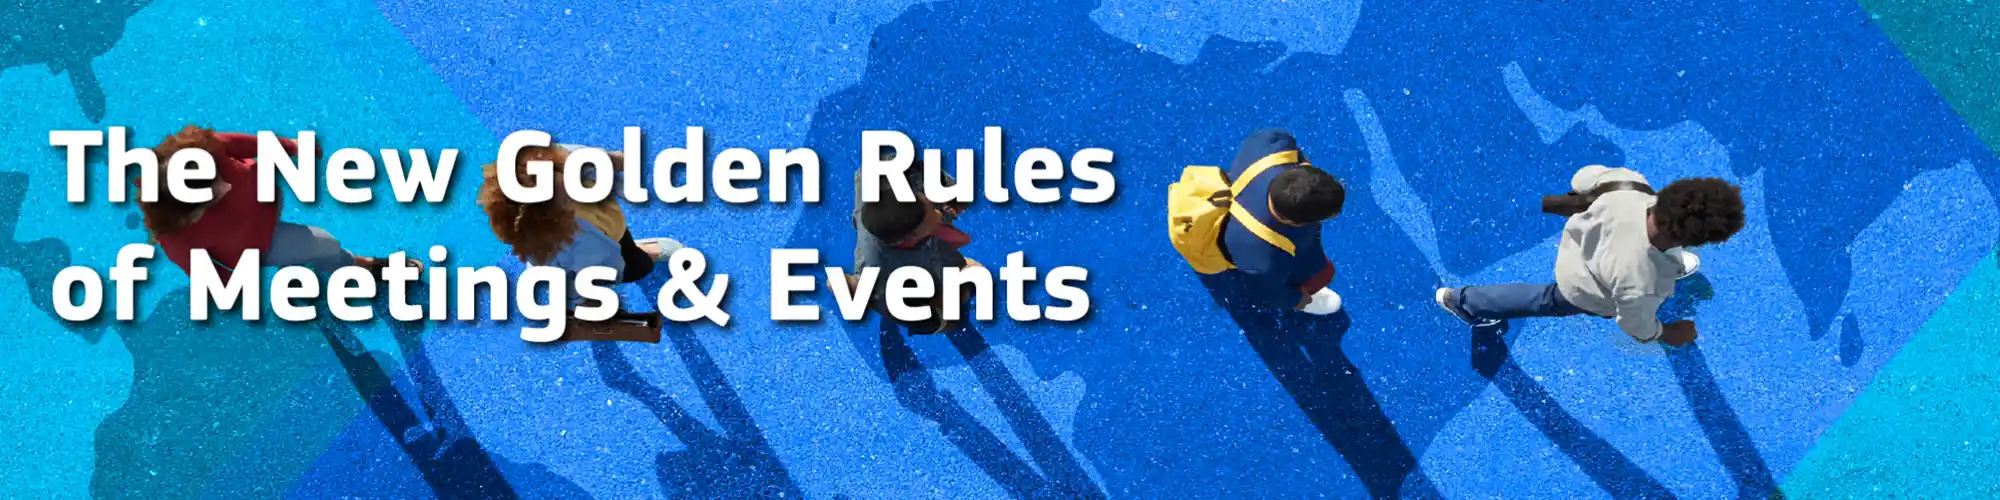 Ways to Master the New Rules of Meetings & Events